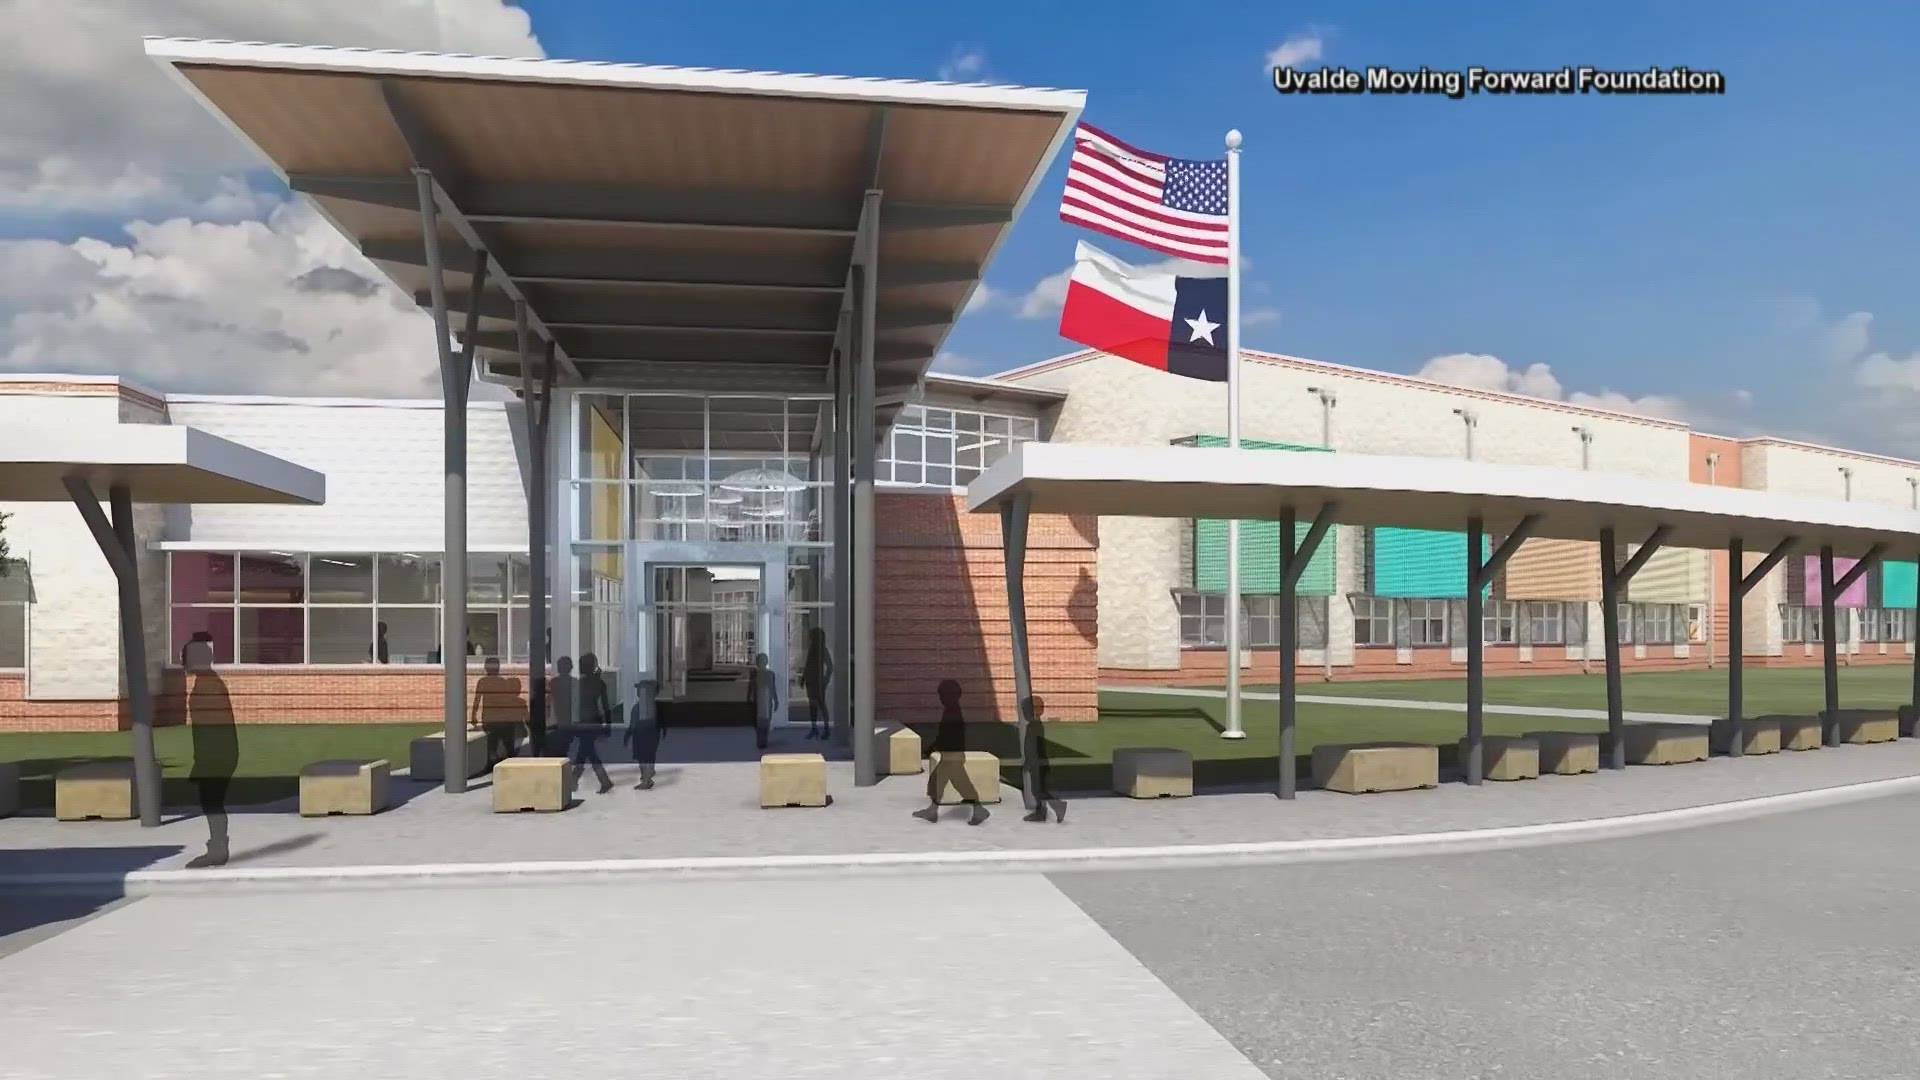 Officials in Uvalde, Texas are working to move forward with a new elementary school after the deadly school shooting last may.